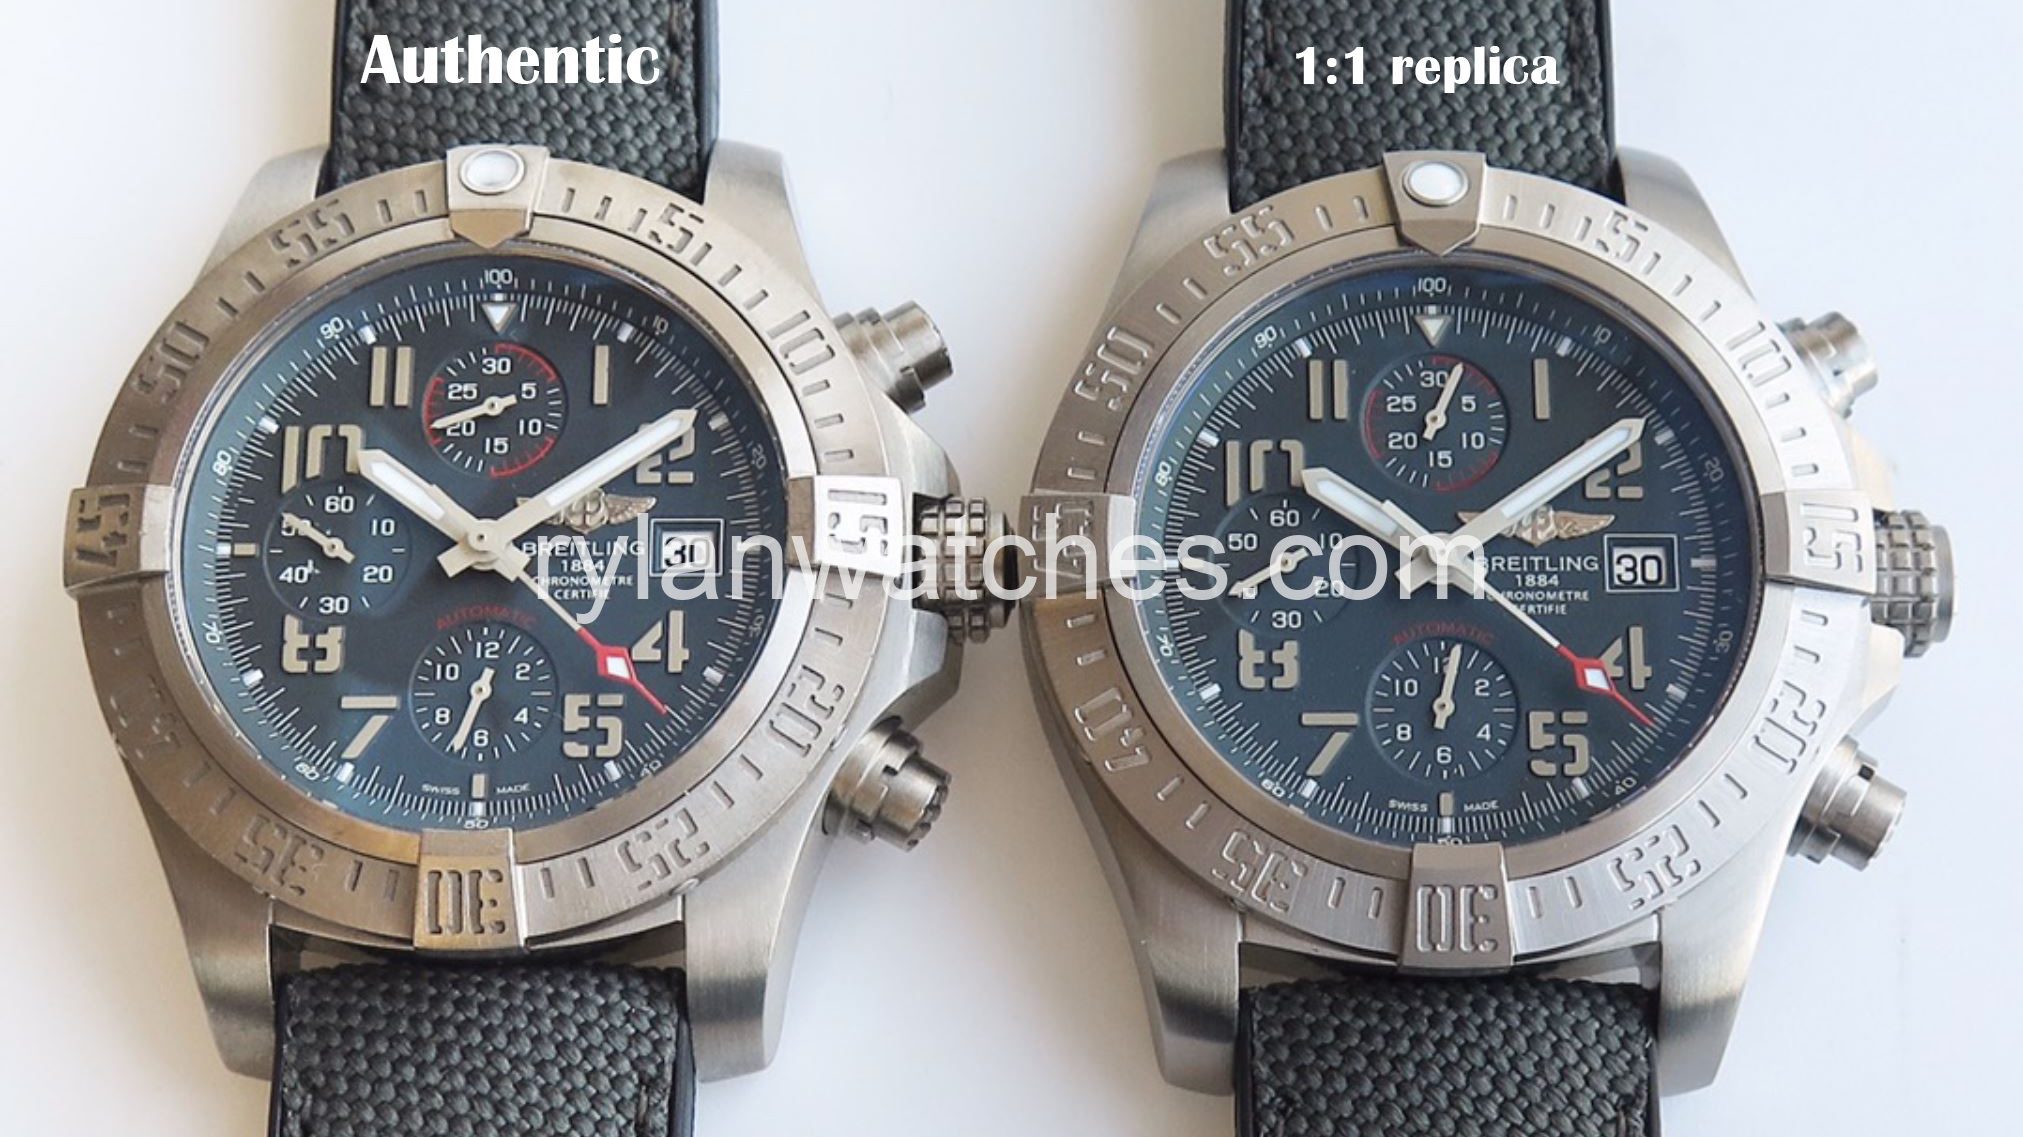 Attention To Detail: Identifying Authentic Features In Breitling Replicas